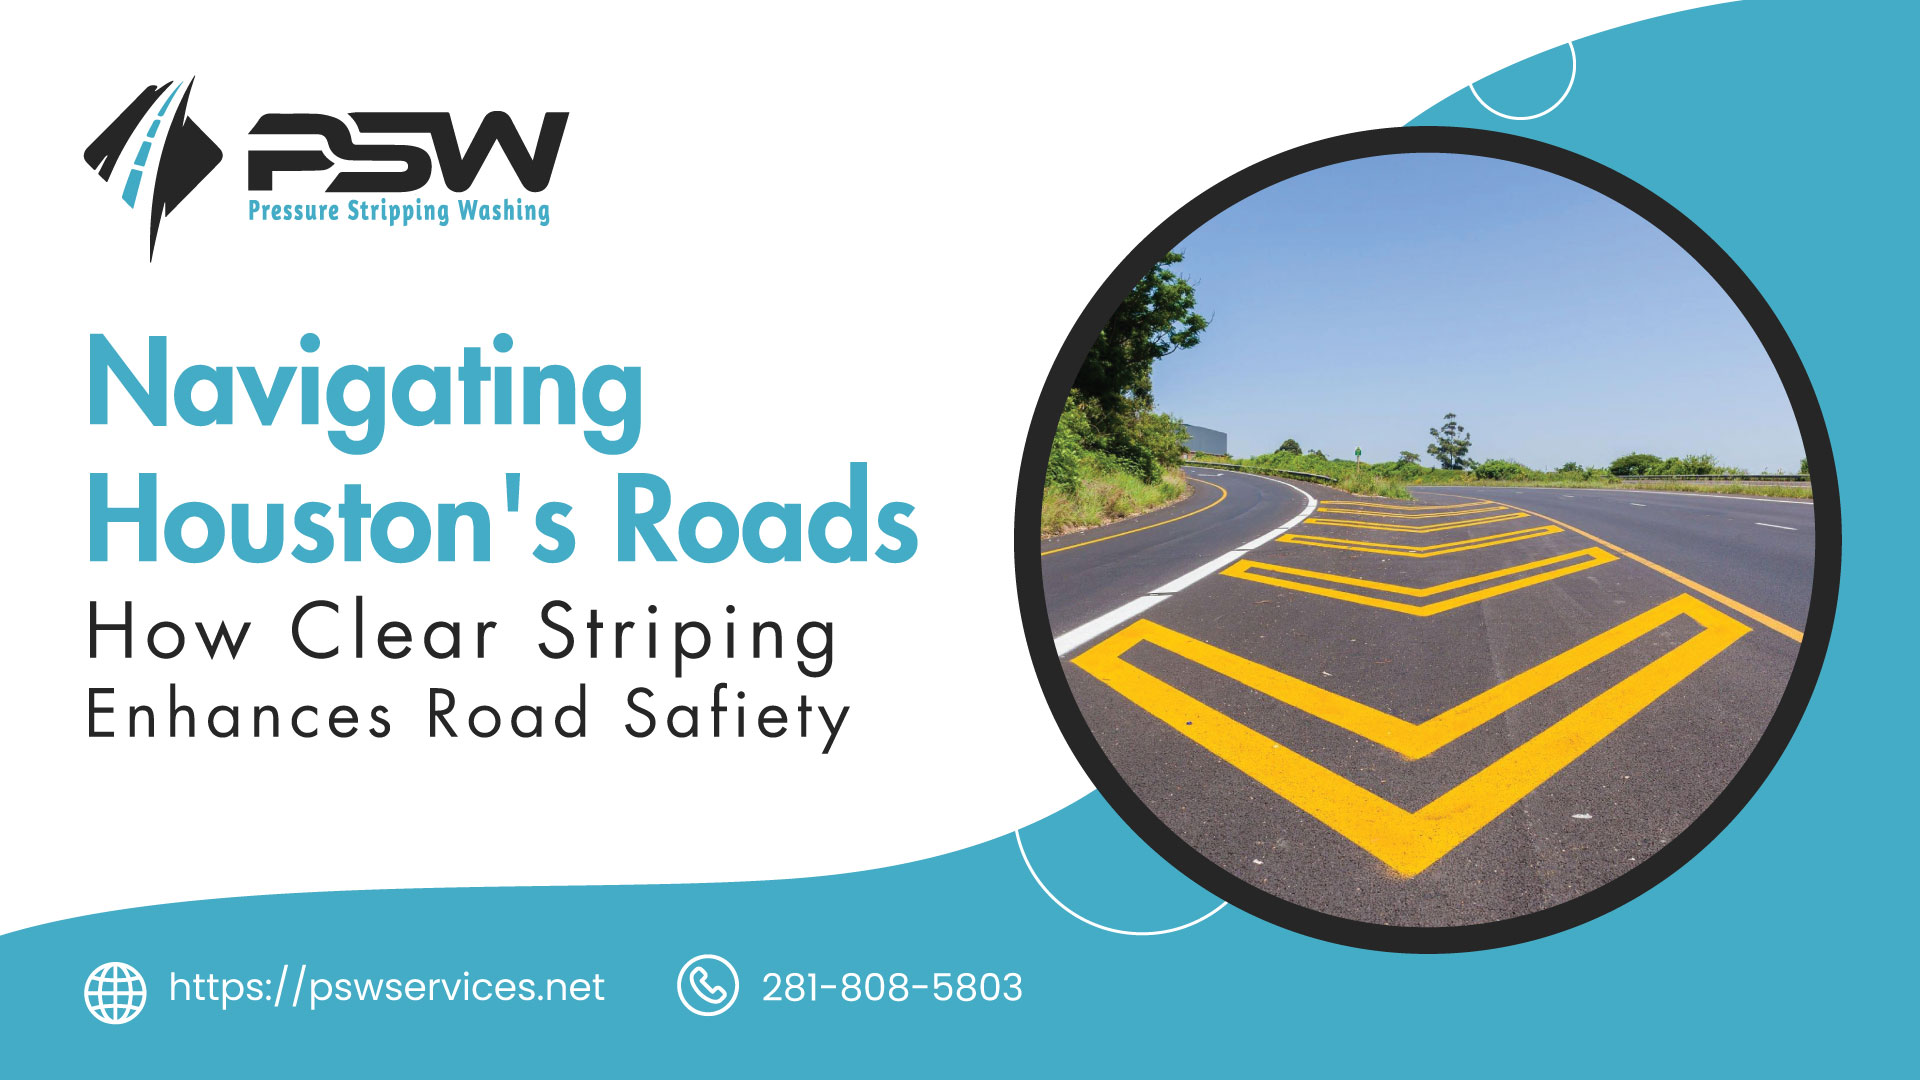 Navigating Houston's Roads How Clear Striping Enhances Road Safety